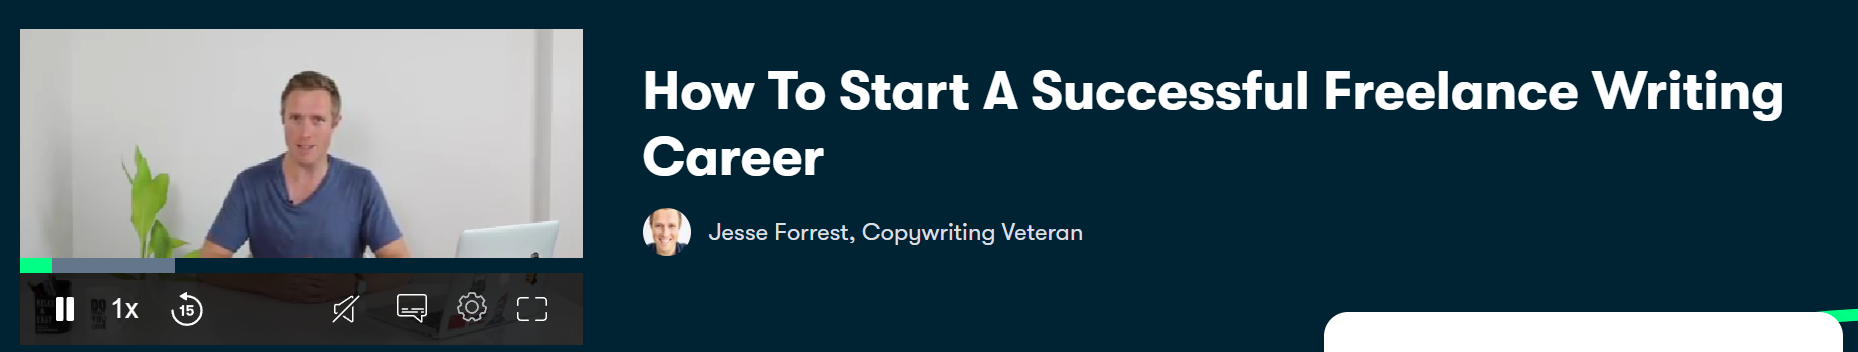 How To Start A Successful Freelance Writing Career